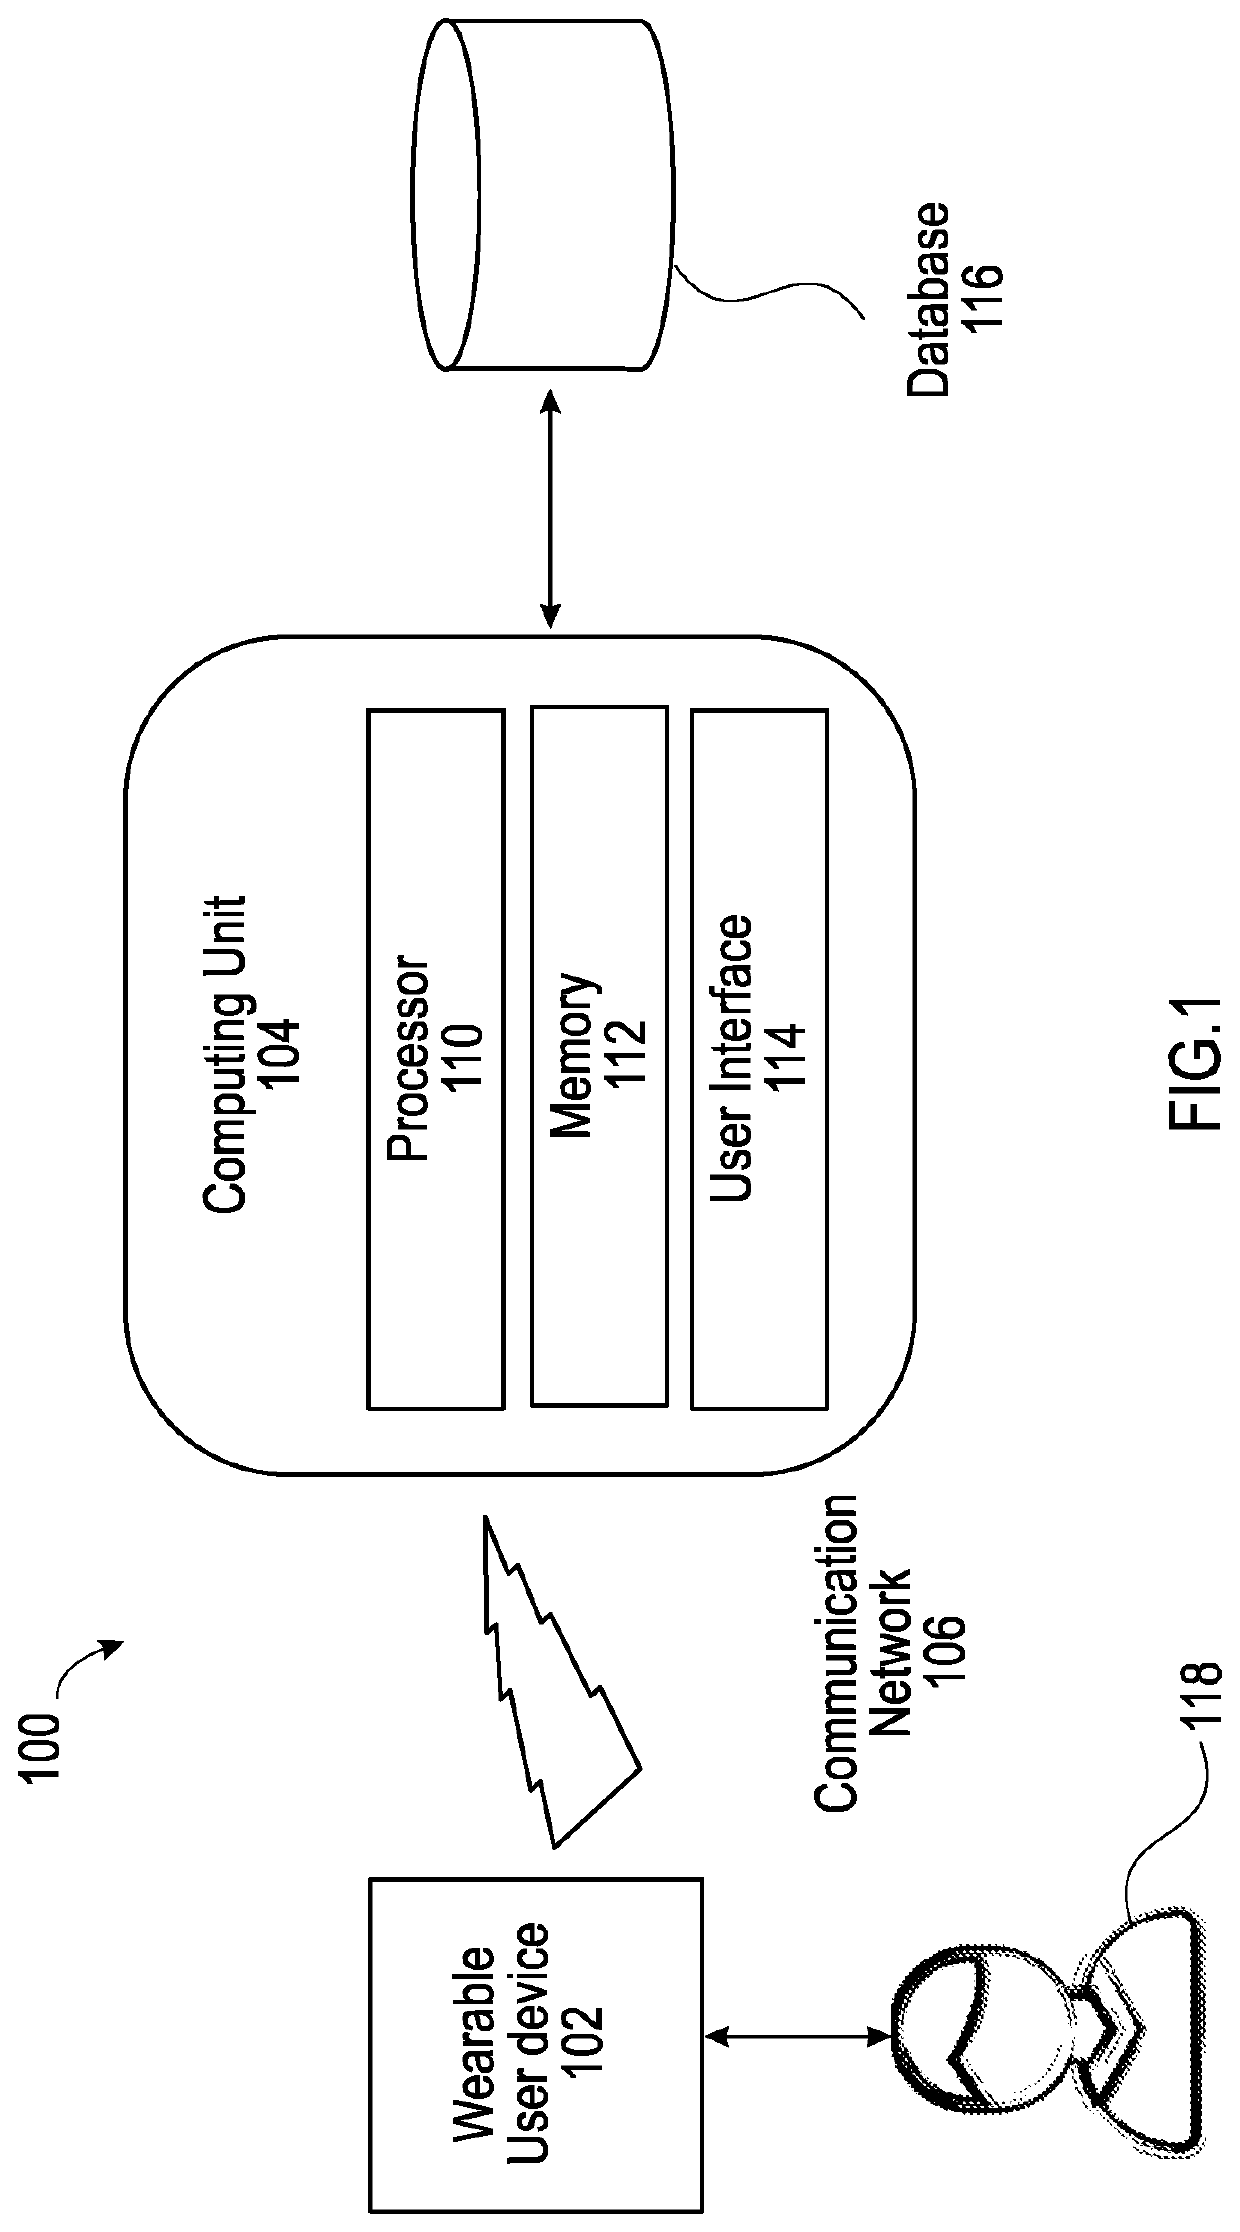 System and method for collecting, analyzing and sharing biorhythm data among users